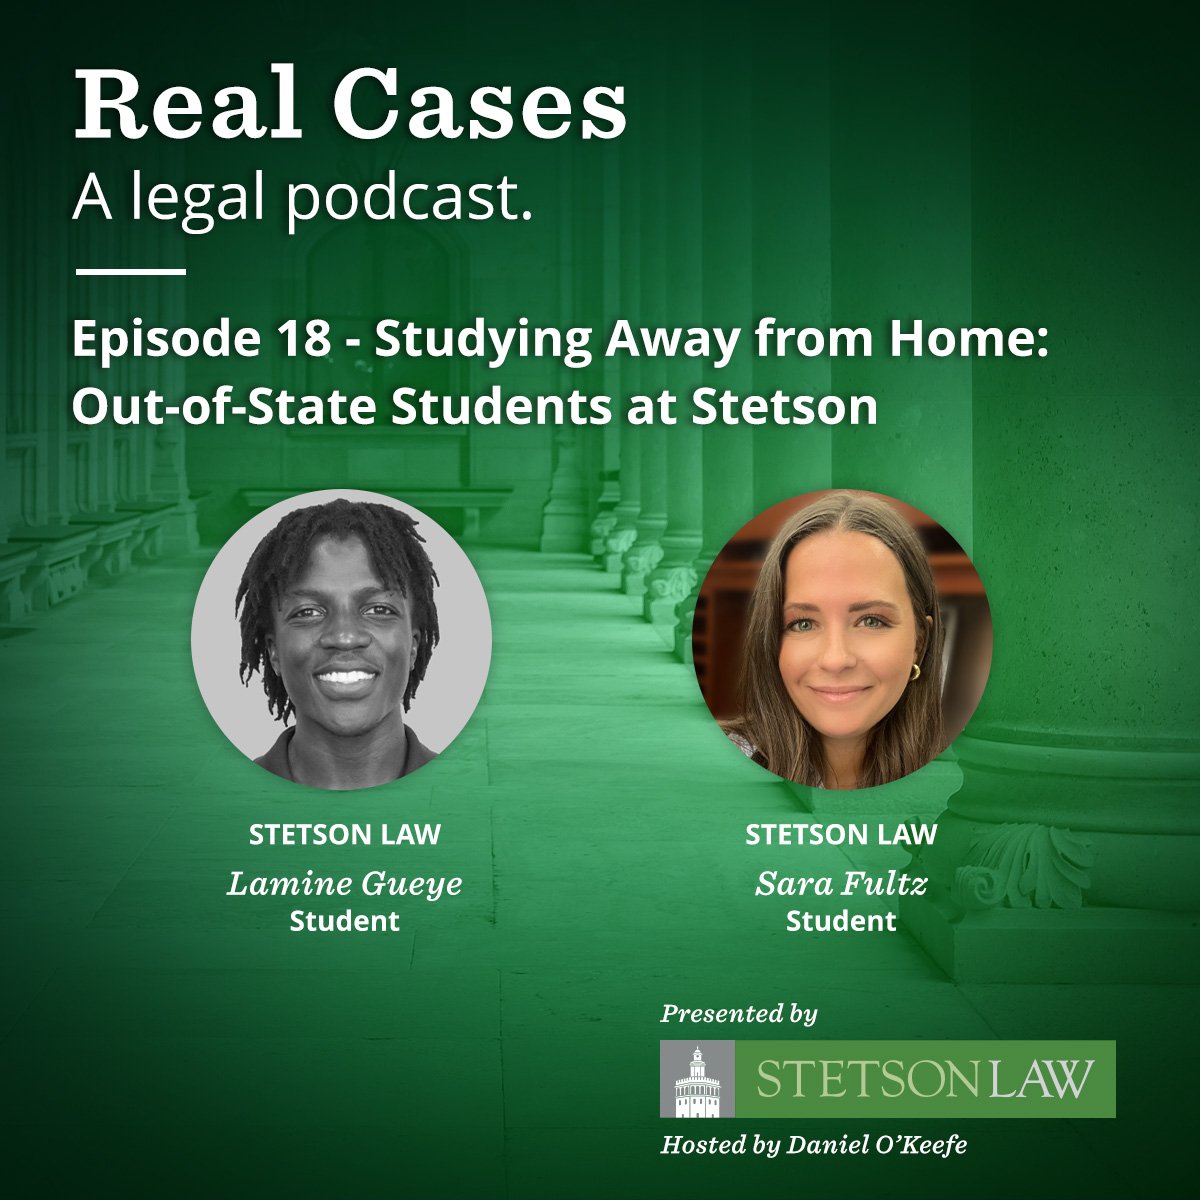 Real Cases - a legal podcast. Episode 18: Studying Away from Home: Out-of-State Students at Stetson - Lamine Gueye & Sara Fultz